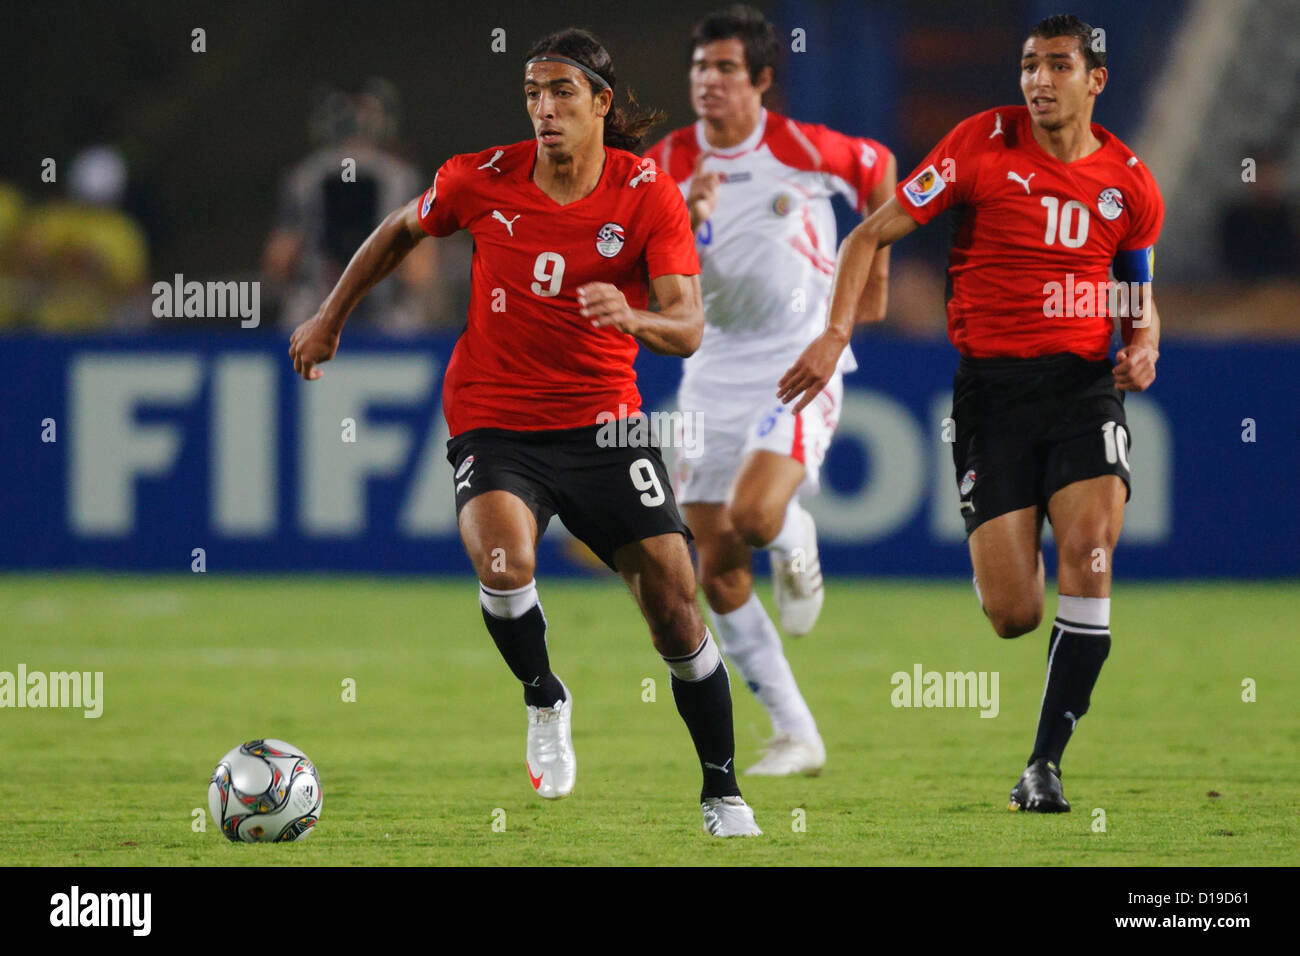 Mohamed Talaat of Egypt (9) controls the ball during the 2009 FIFA U-20 World Cup round of 16 match against Costa Rica. Stock Photo